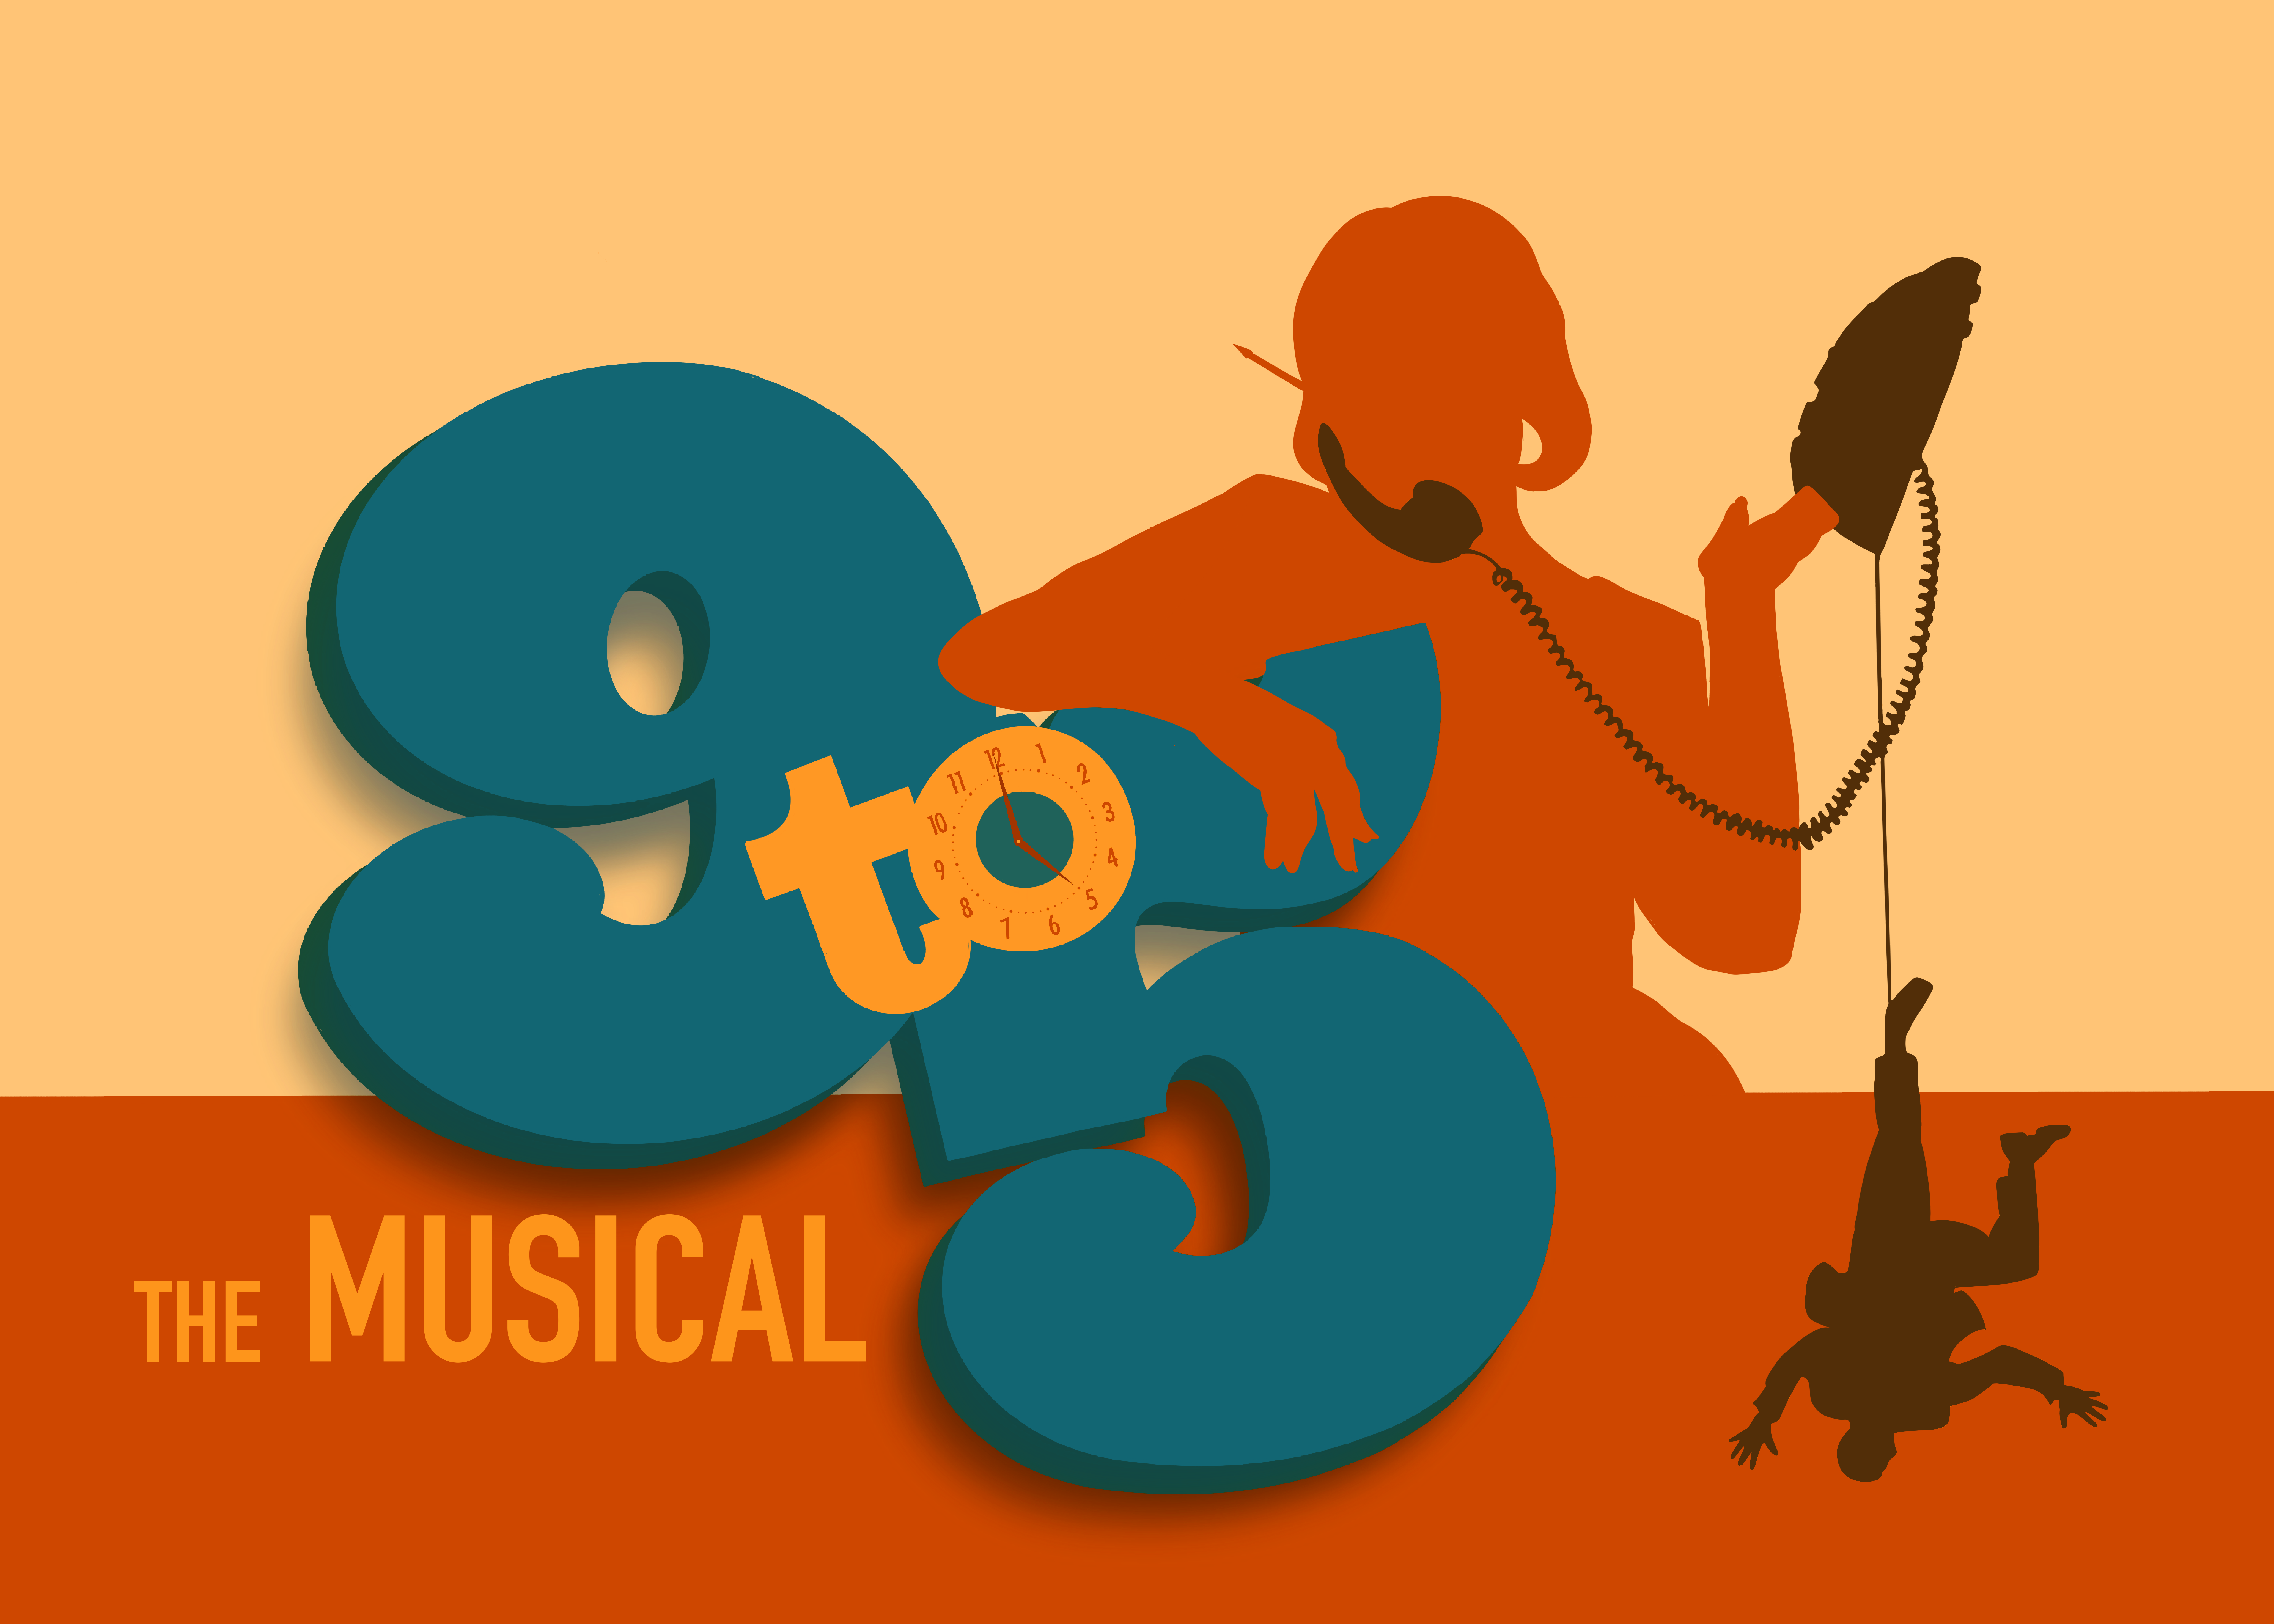 A cartoon image of a woman's silhouette leaning against the numbers "9 to 5". The woman is holding a telephone receiver to her ear. A man silhouette dangles from the phone cord